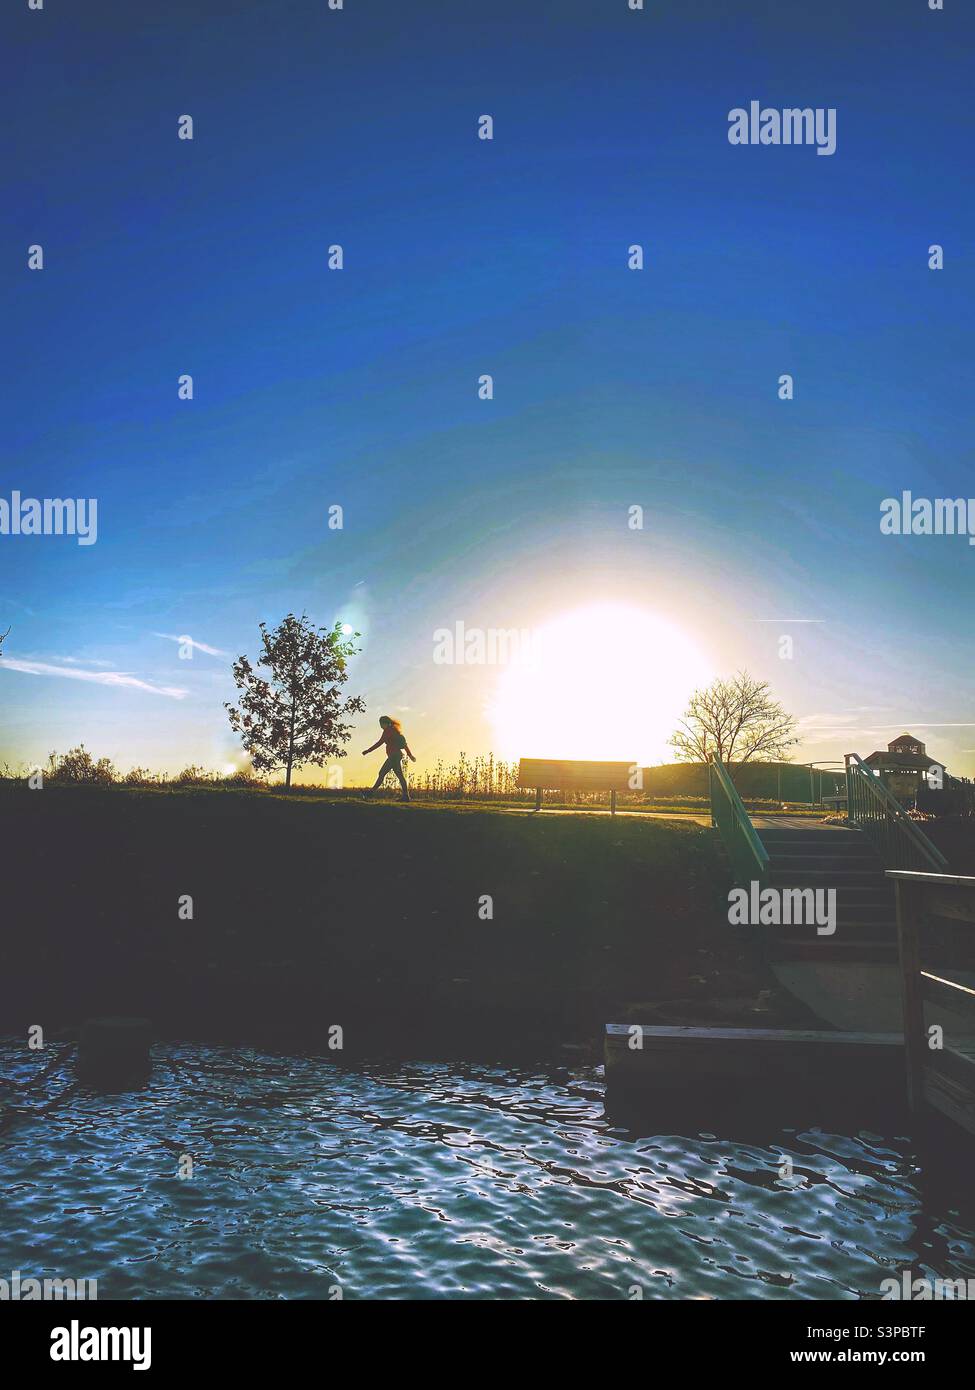 A heavily filtered shot of a scene in a park at sunset.  The sun is large and low, a silhouette of a person walking, a playground in the background  and water from a lake in the foreground. (1) Stock Photo